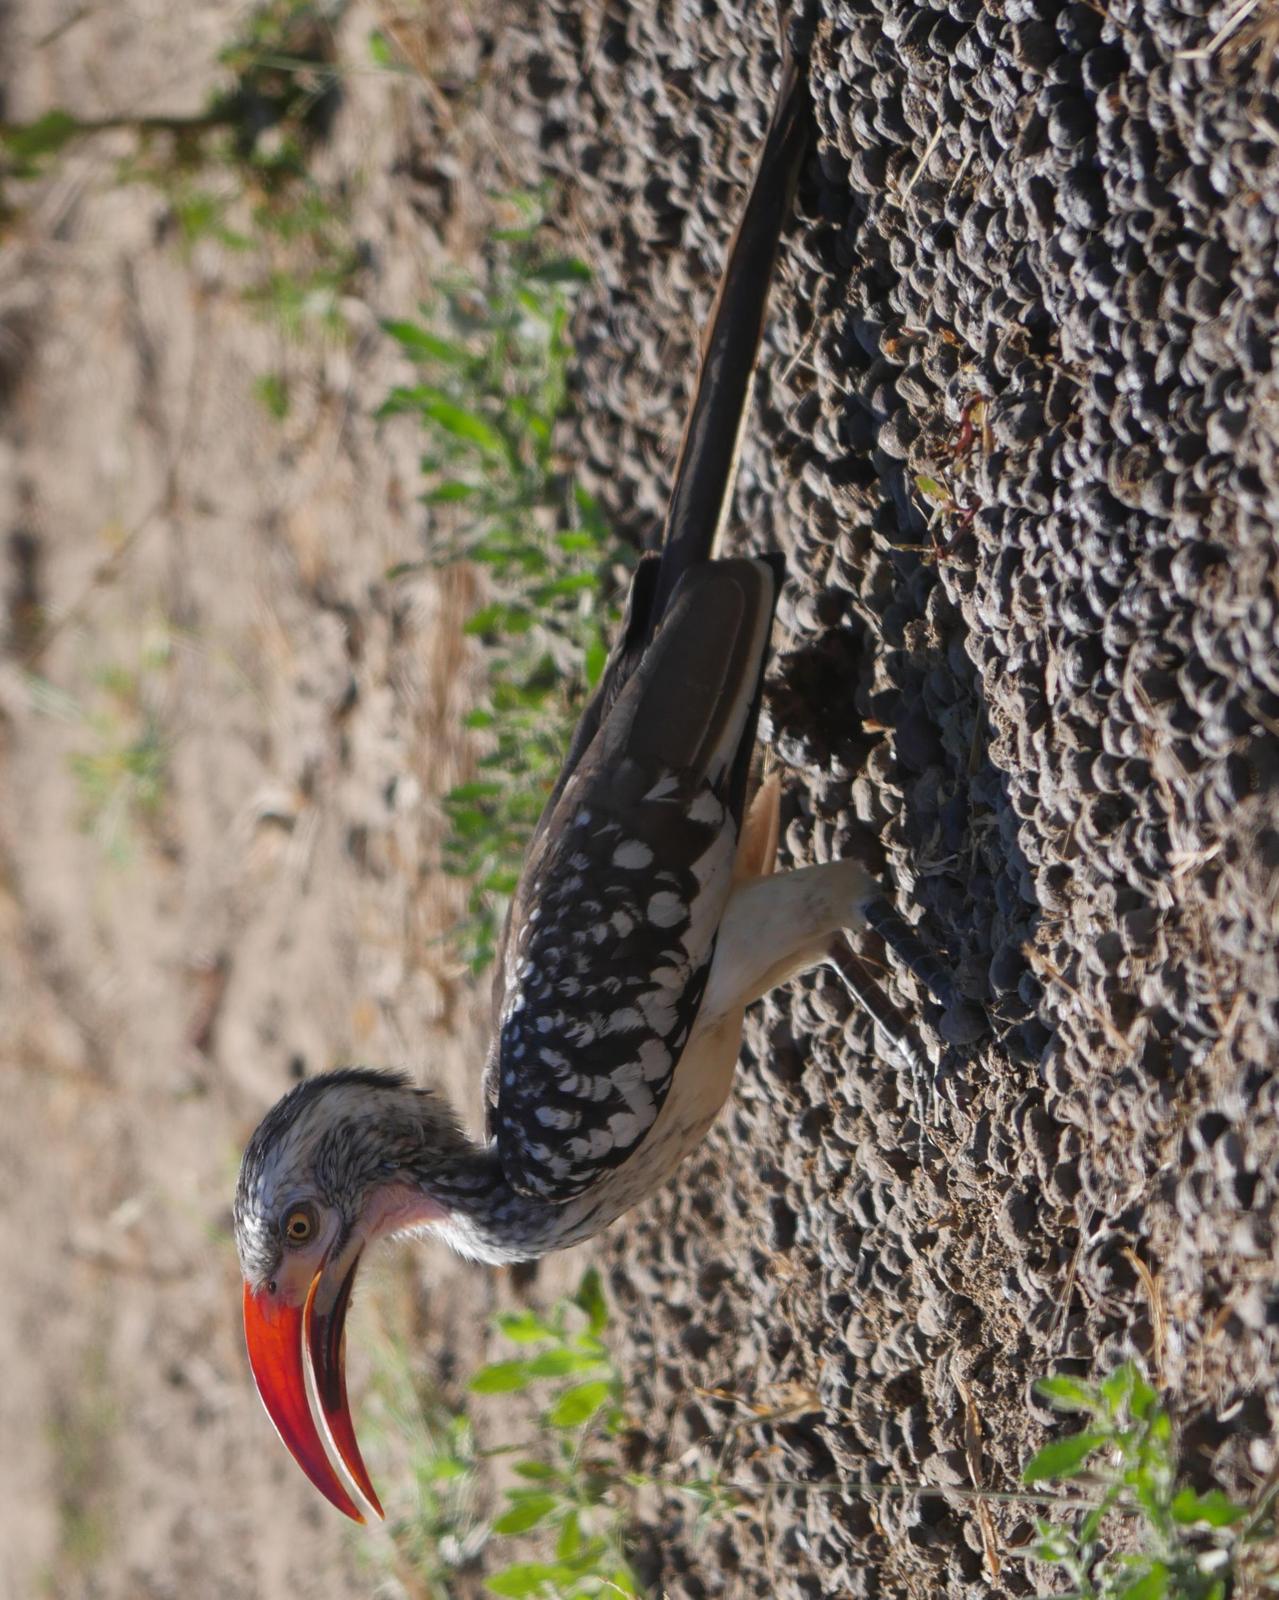 Southern Red-billed Hornbill Photo by Peter Lowe